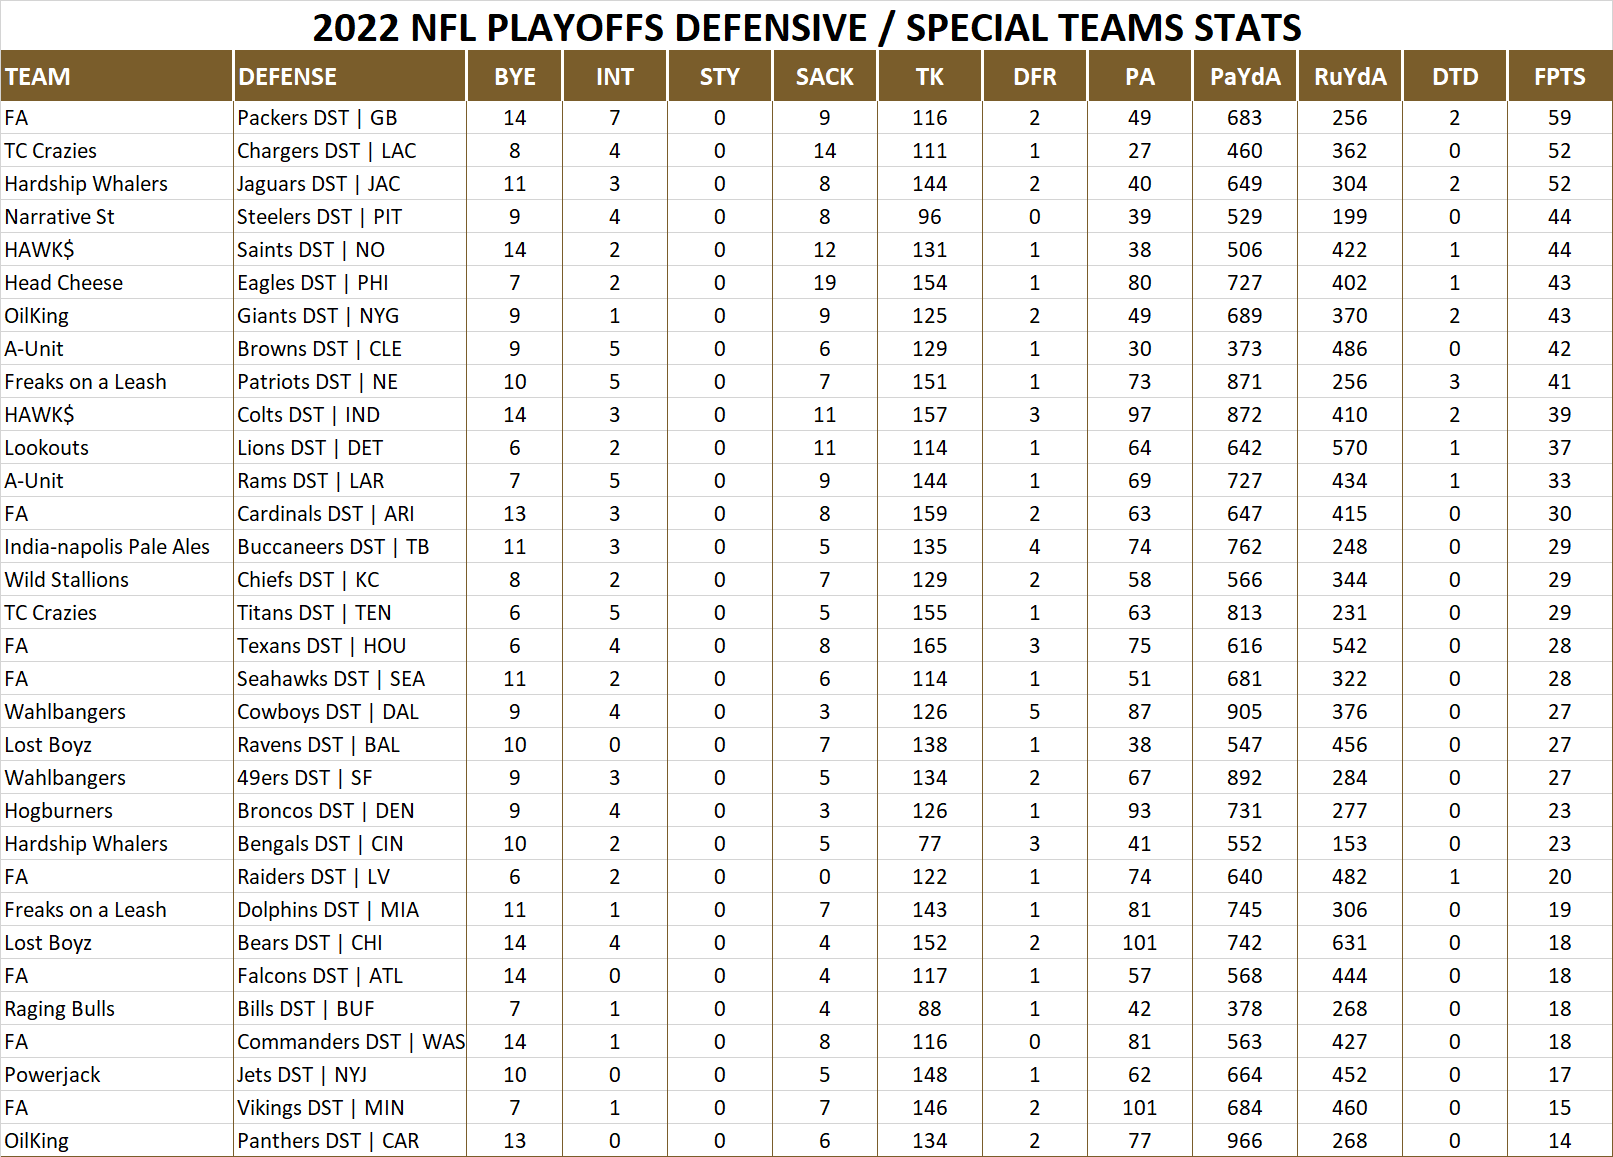 2022 National Football League Pool Playoff Player Defensive Stats